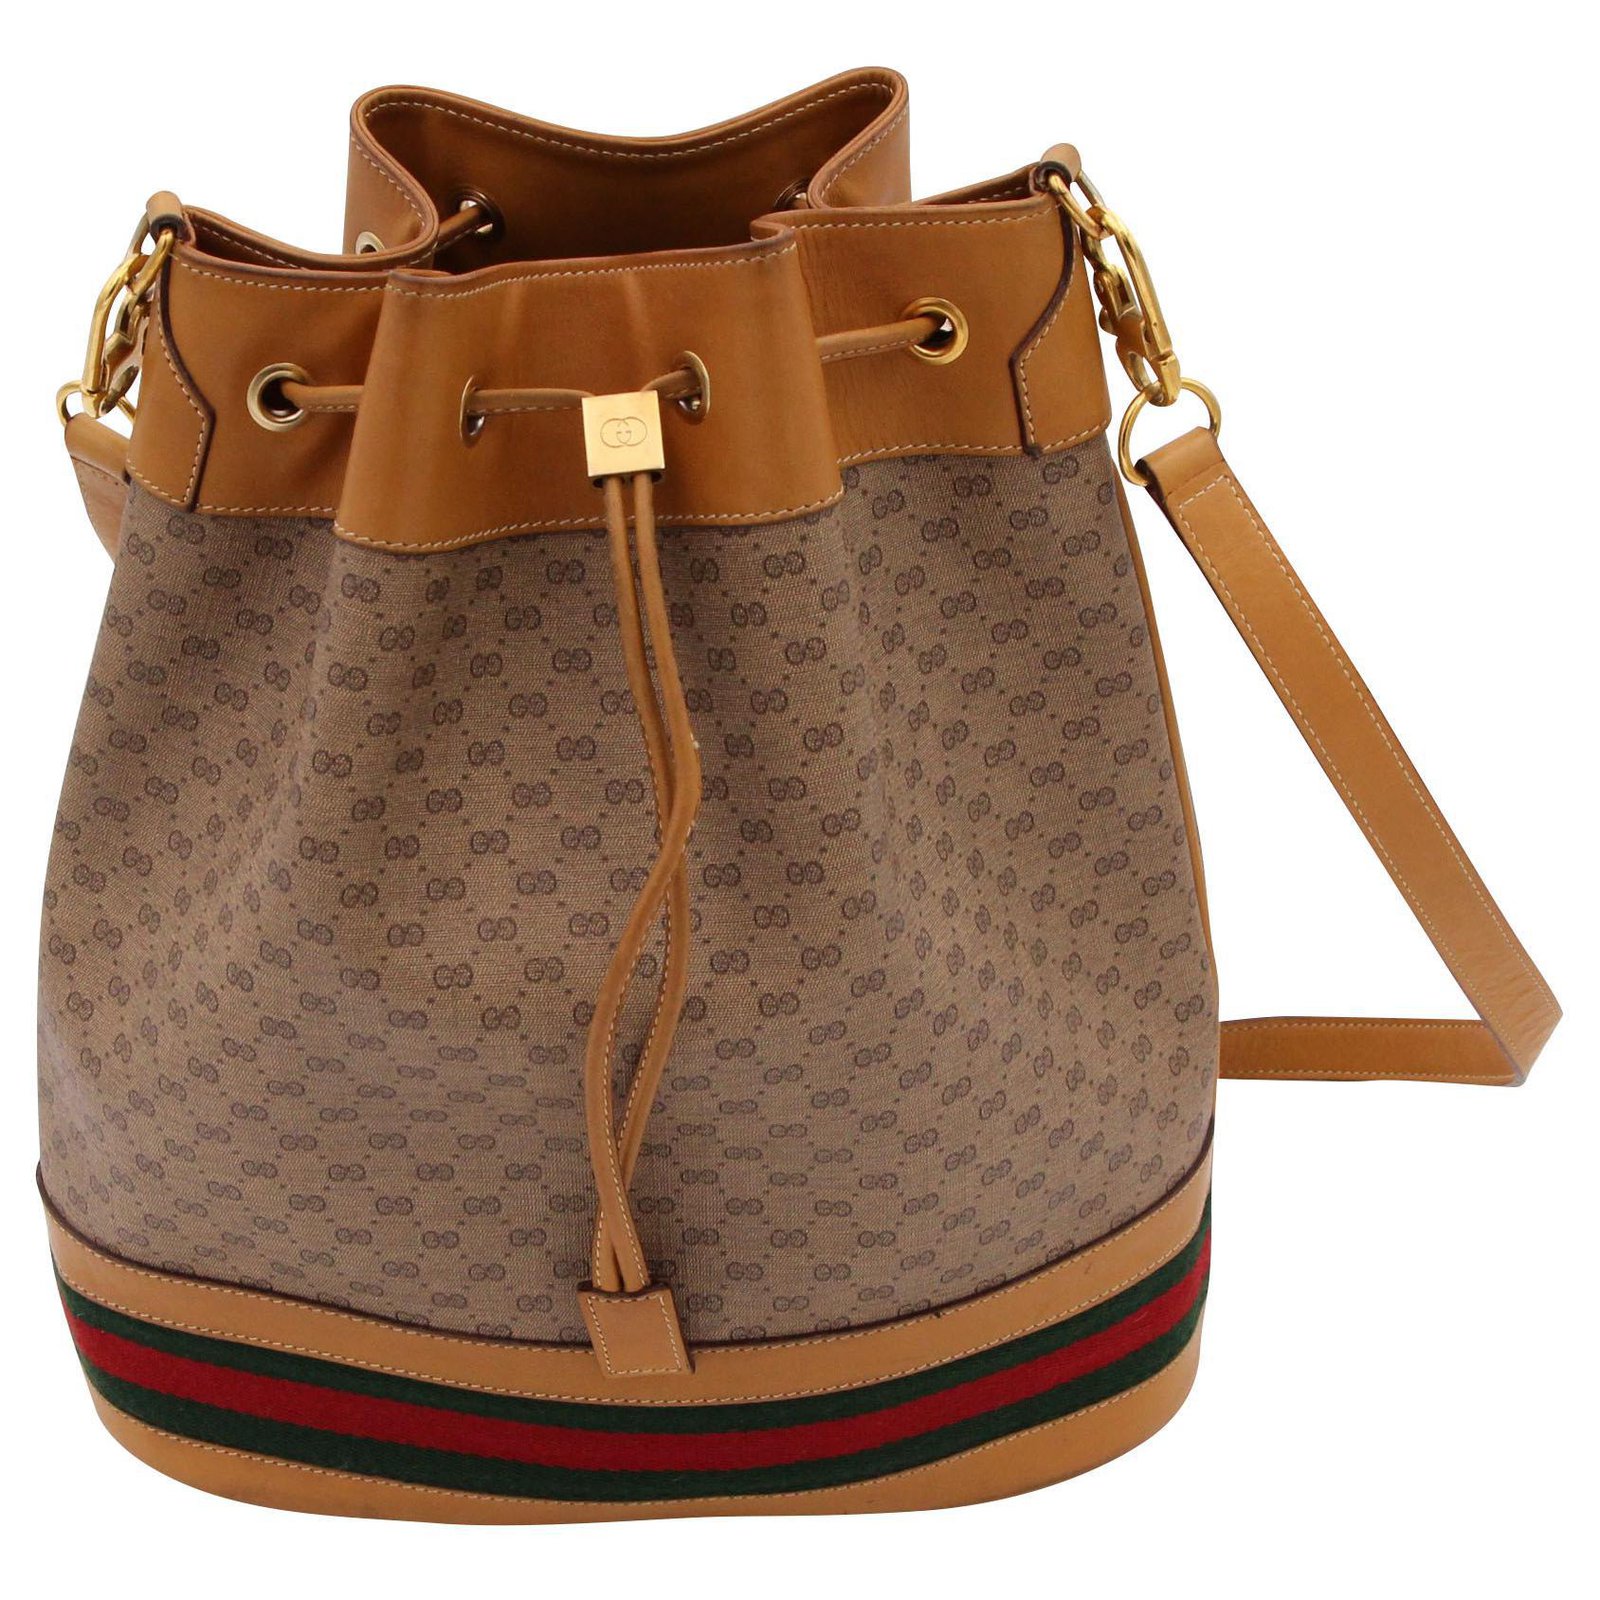 Vintage Bags & Purses for Sale in Online Auctions